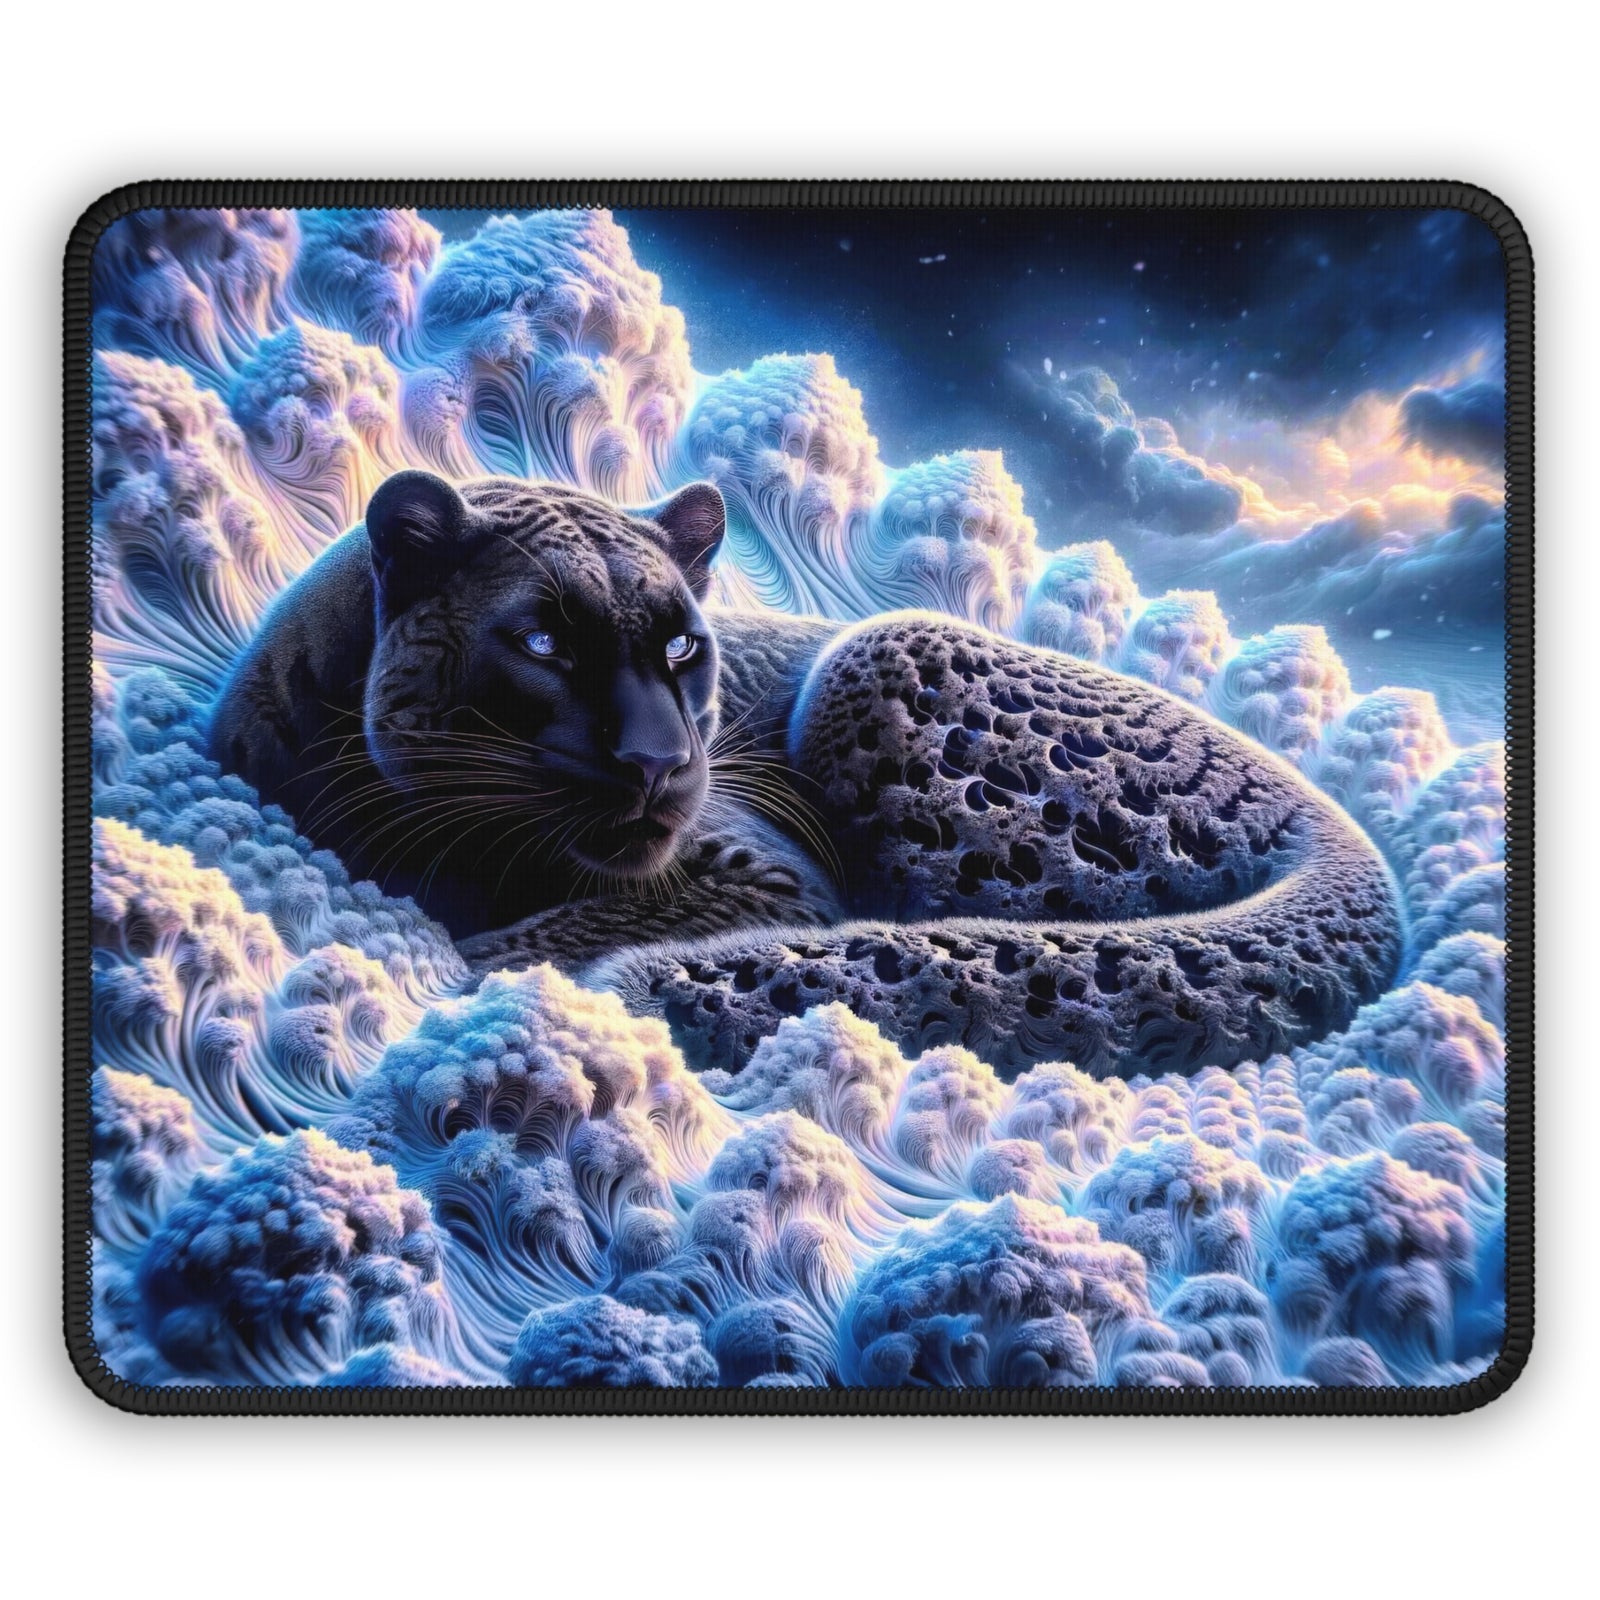 Enigma of the Black Leopard Gaming Mouse Pad